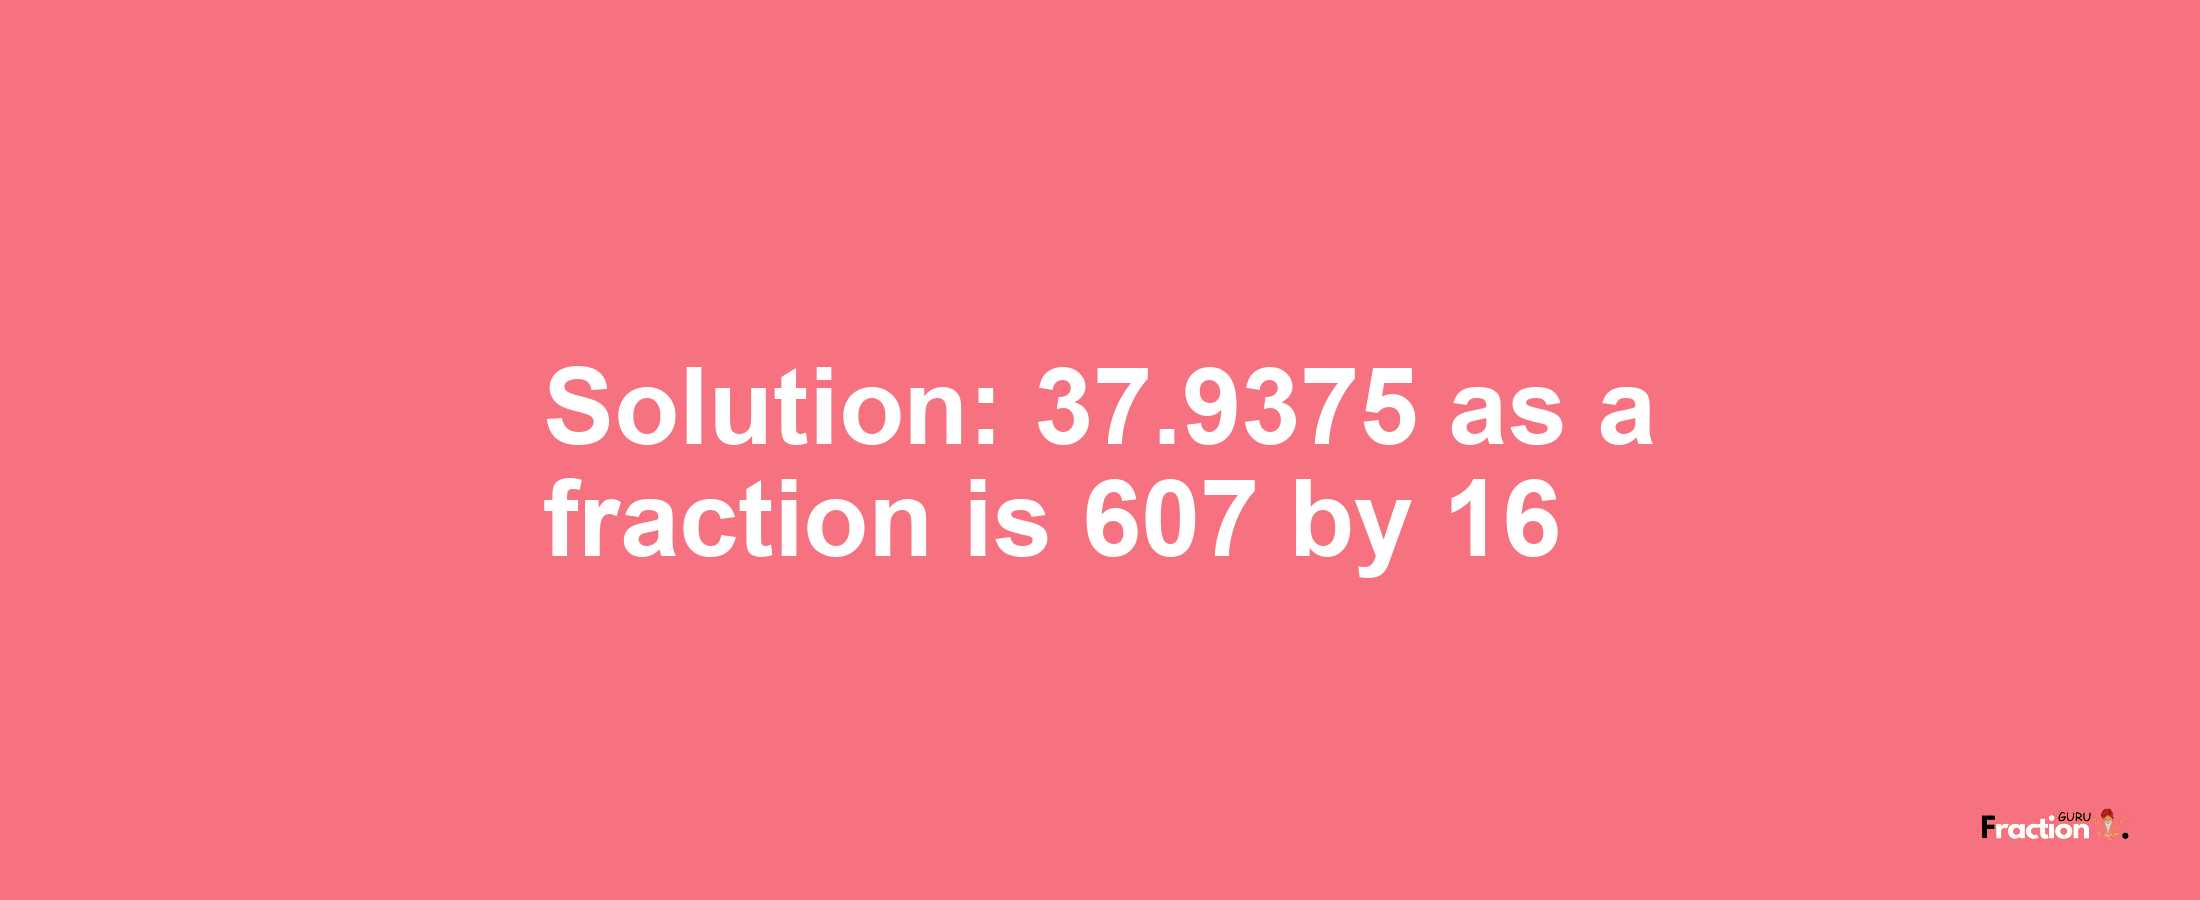 Solution:37.9375 as a fraction is 607/16